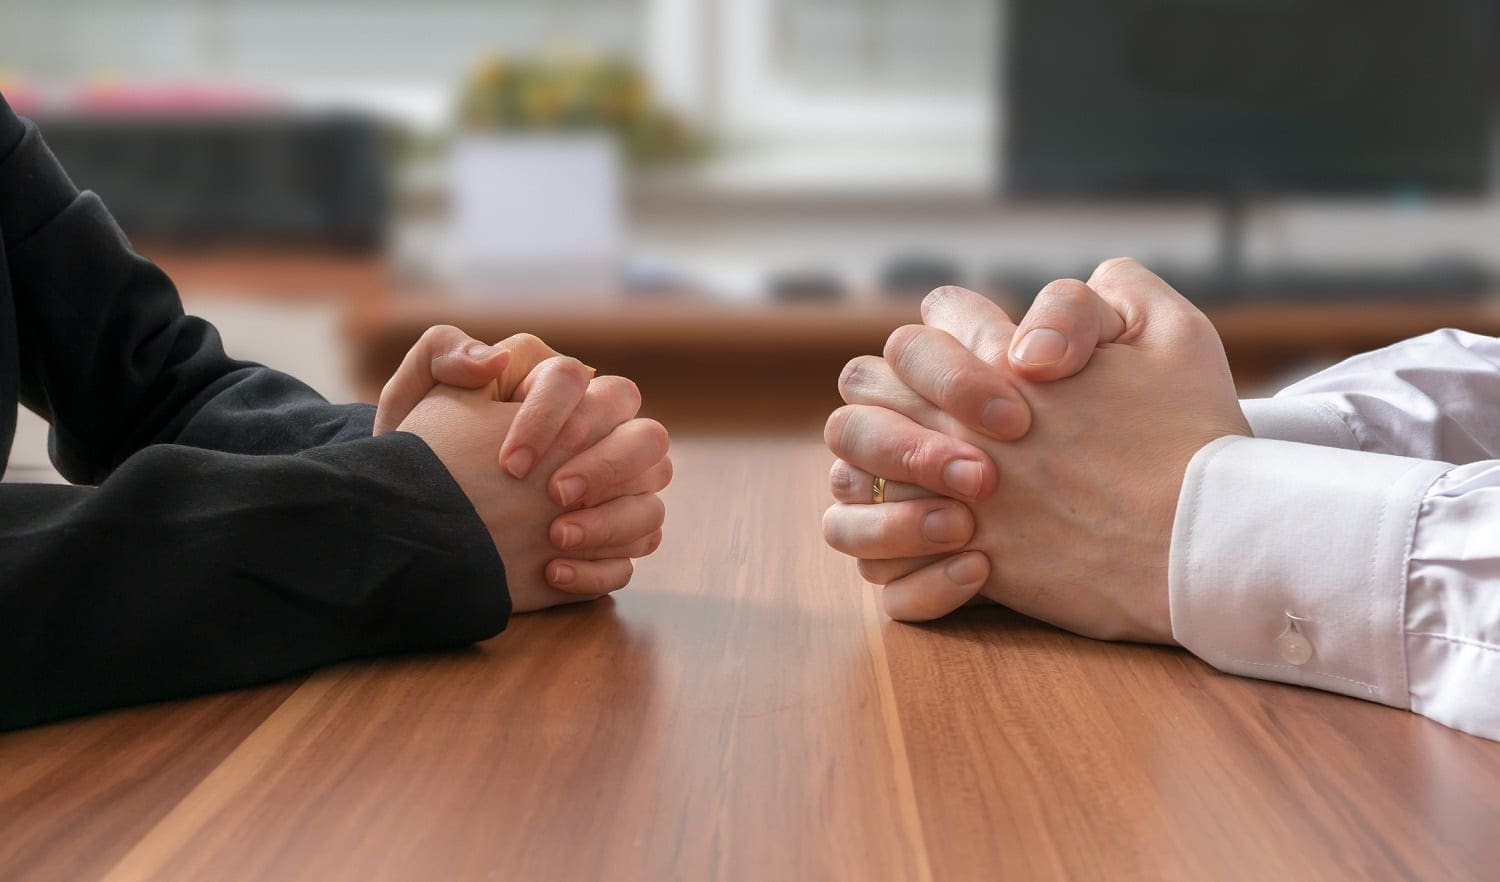 hands of people meeting across the table: ID 66132007 © Vchalup | Dreamstime.com